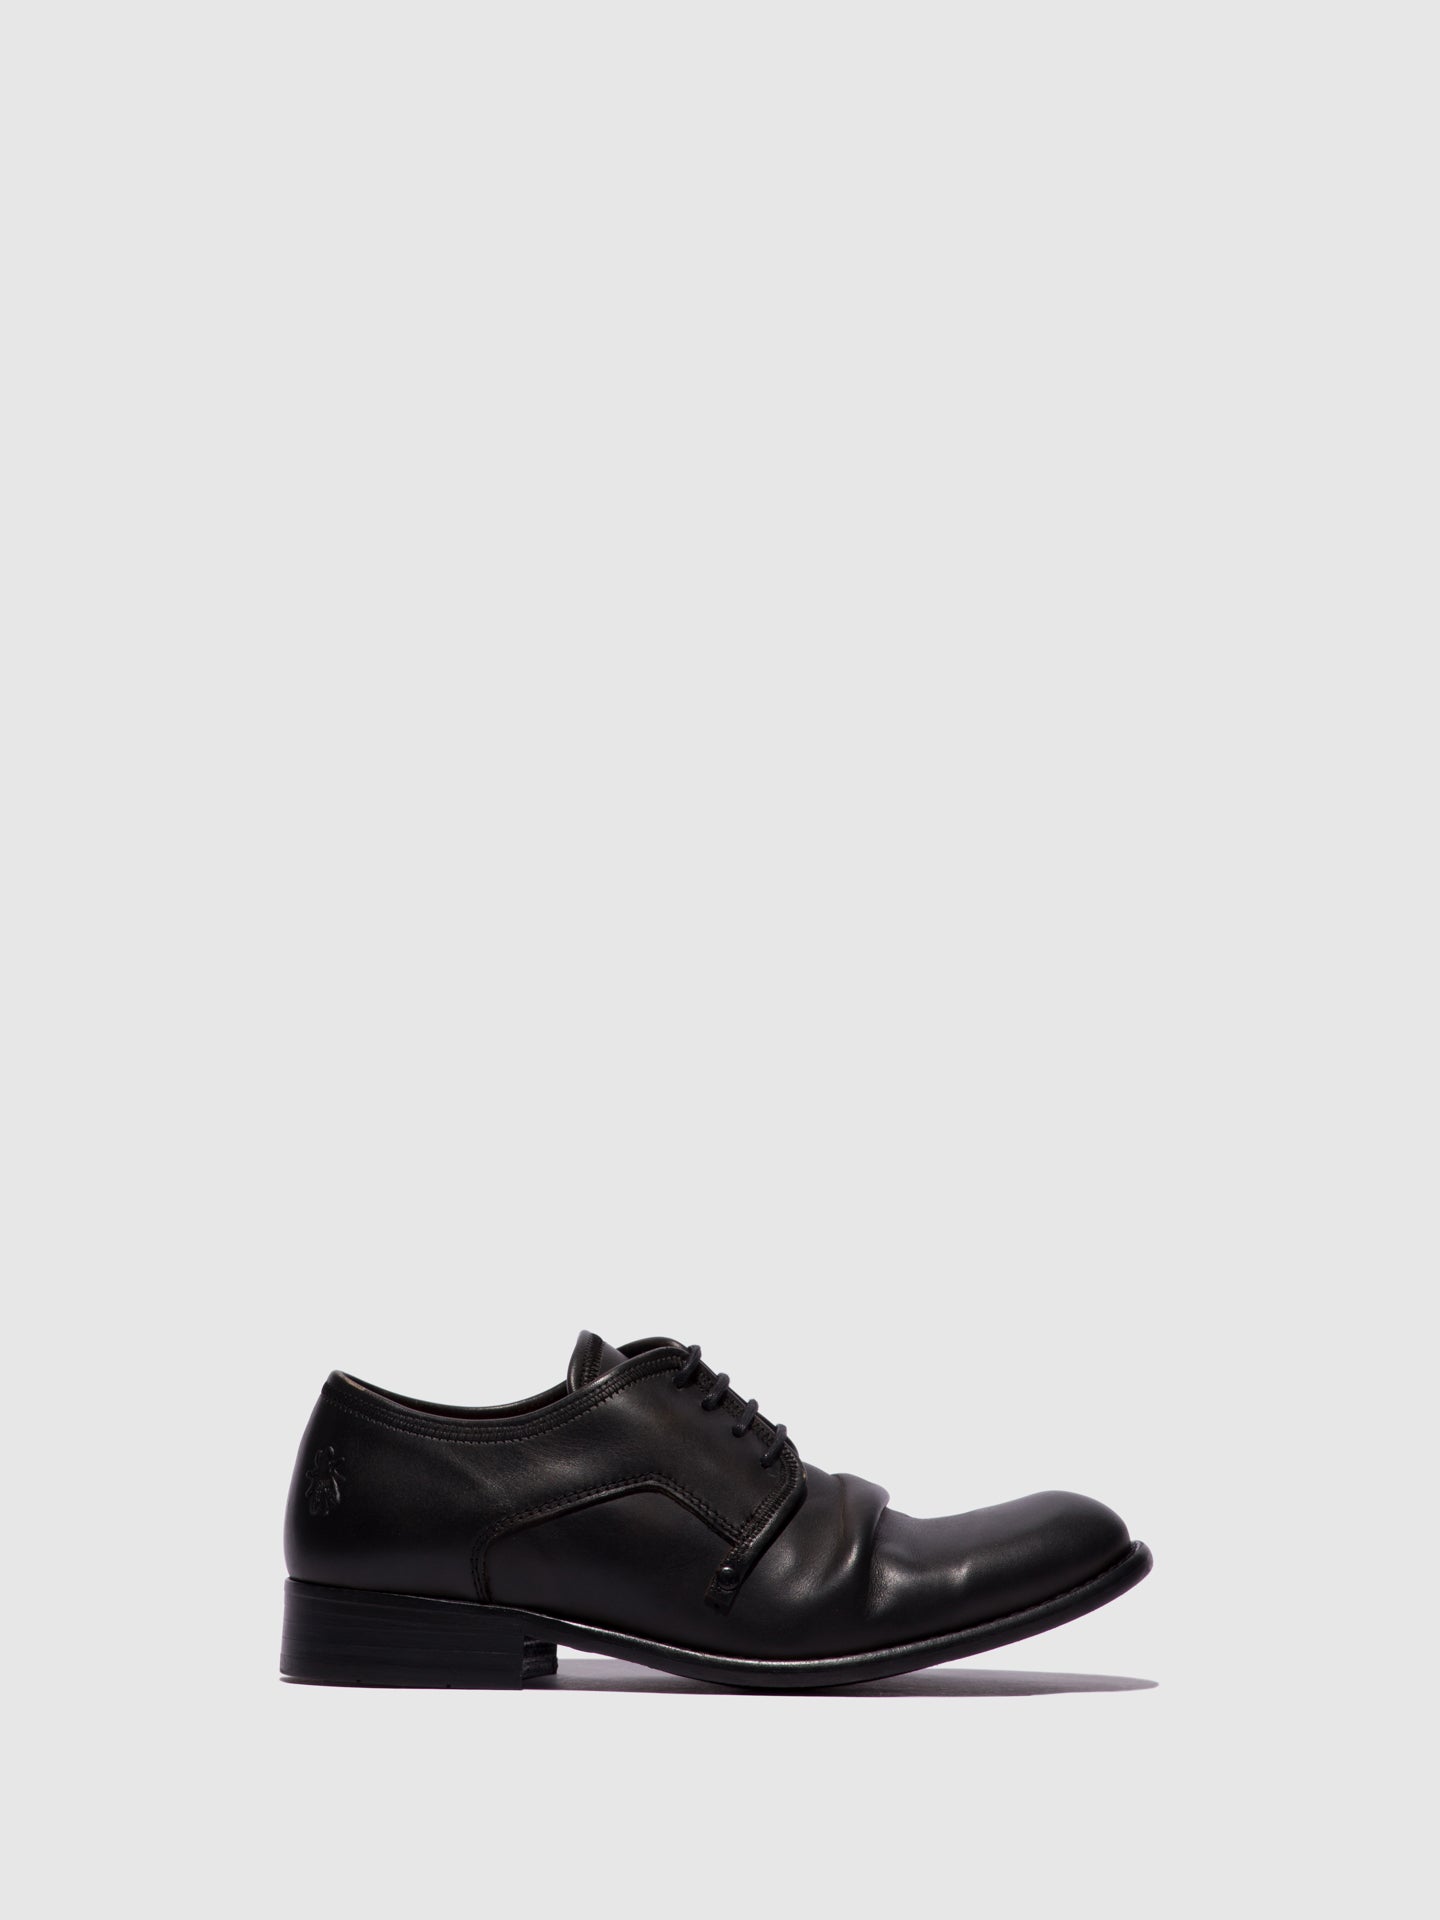 Fly London Lace-up Shoes WEST BLACK